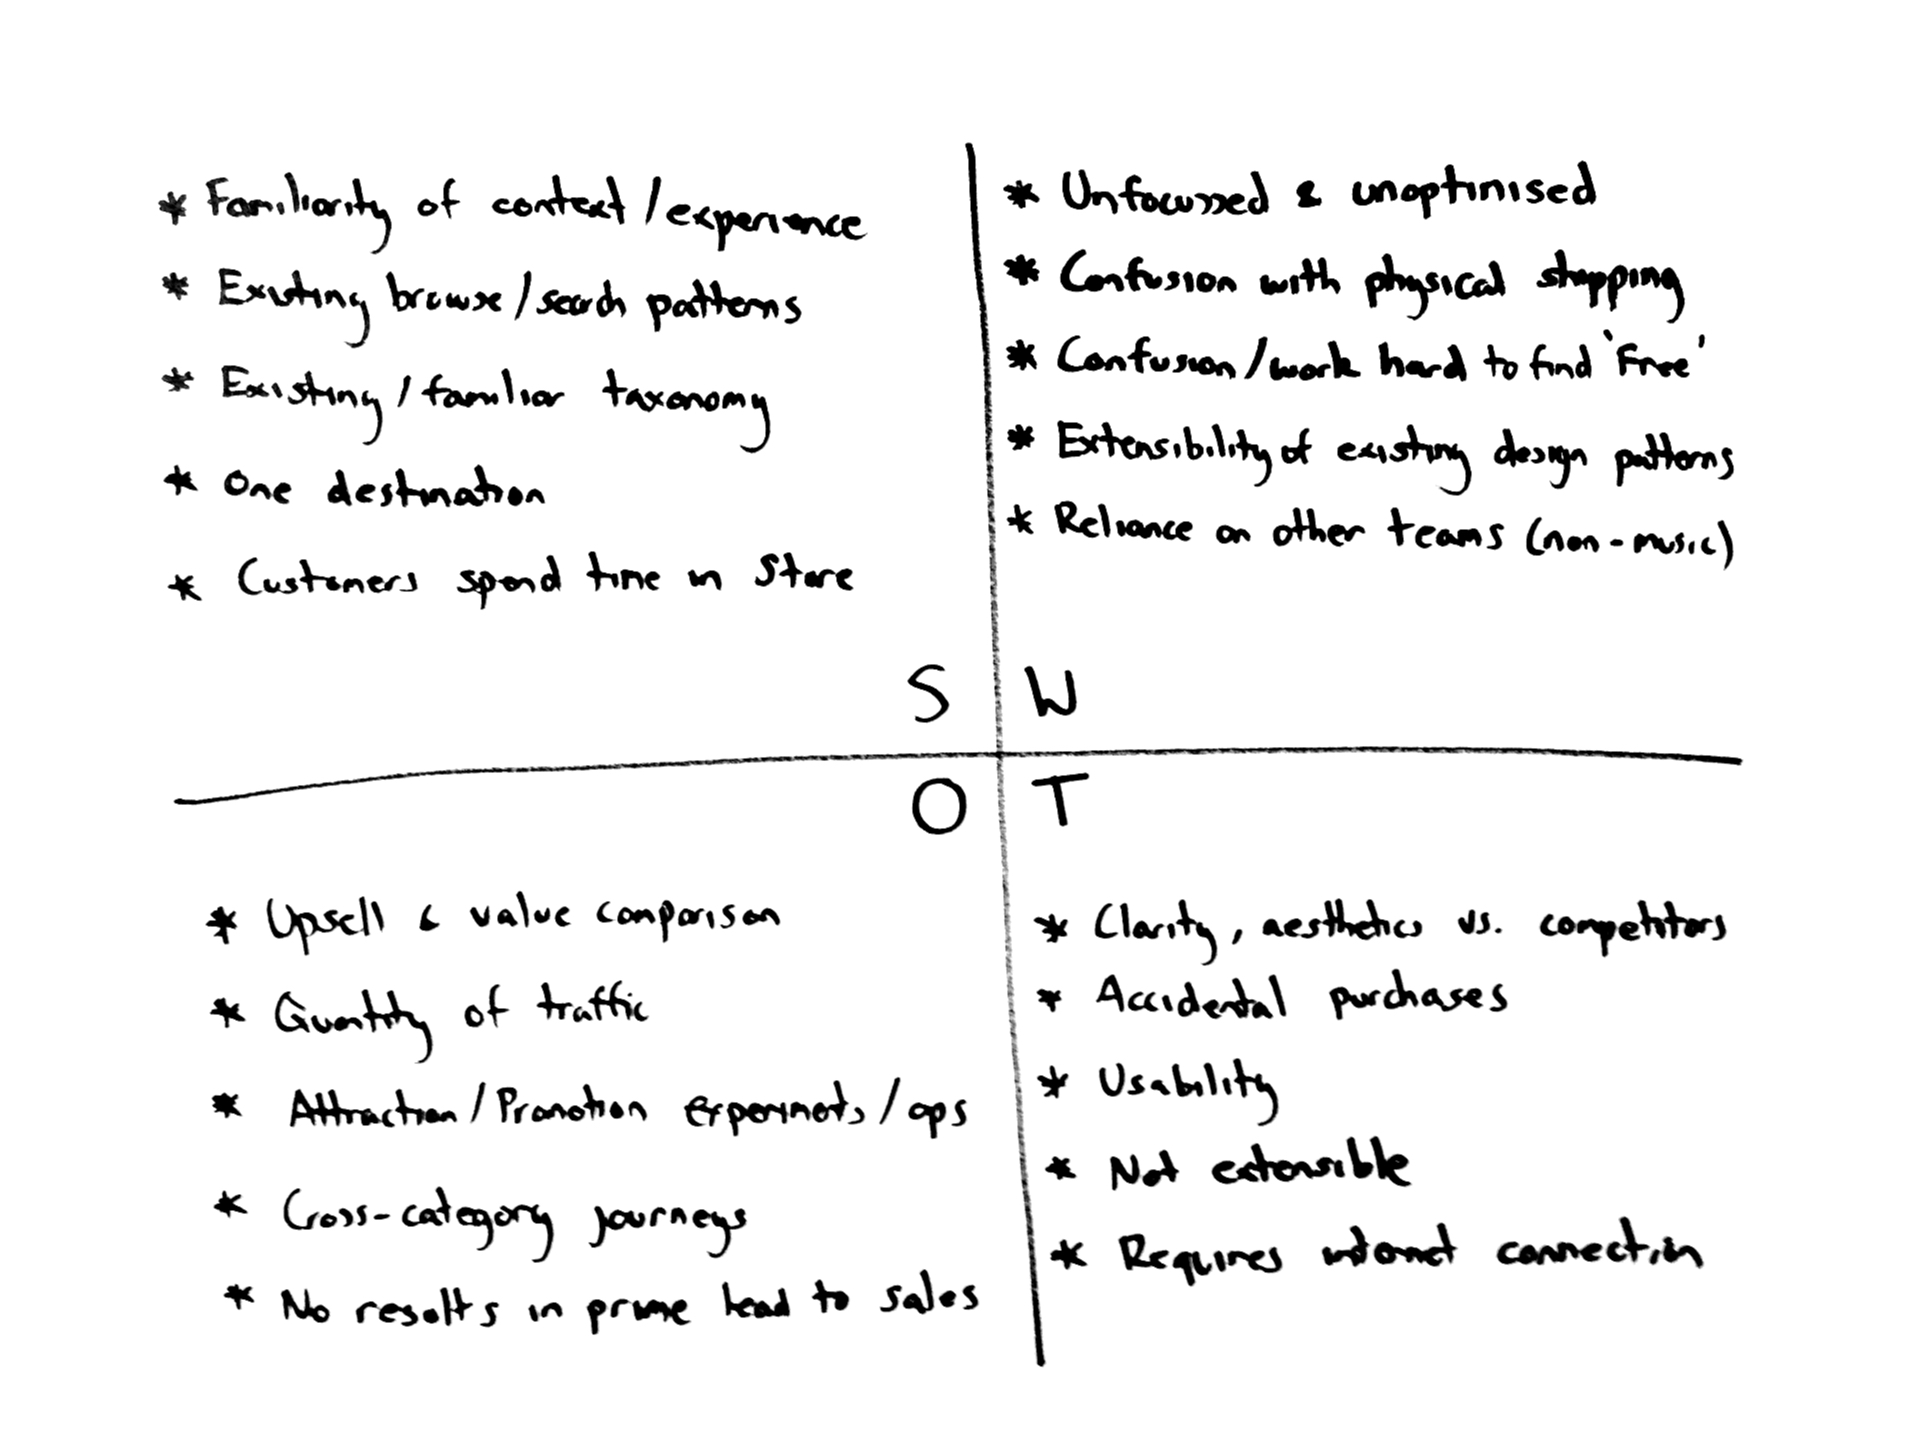 Shows a piece of paper with four quadrants representing Strengths, Weaknesses, Opportunities and Threats. Strengths include 'familiarity of context/experience', 'existing browse/search patterns', 'existing/familiar taxonomy', 'one destination', 'customers spend time in store'. Weaknesses include 'unfocussed and unoptimised', 'confusion with physical shopping', 'work harder to find what's free', 'extensibility of design patterns' and 'reliance on other teams'. Opportunities include 'upsell and value comparison', 'quantity of traffic', 'attraction/promotion experiments and opportunities', 'cross-category journeys'. Threats include 'clarity, aesthetics versus competitors', 'accidental purchases', 'usability', 'not extensible', 'requires internet connection'.